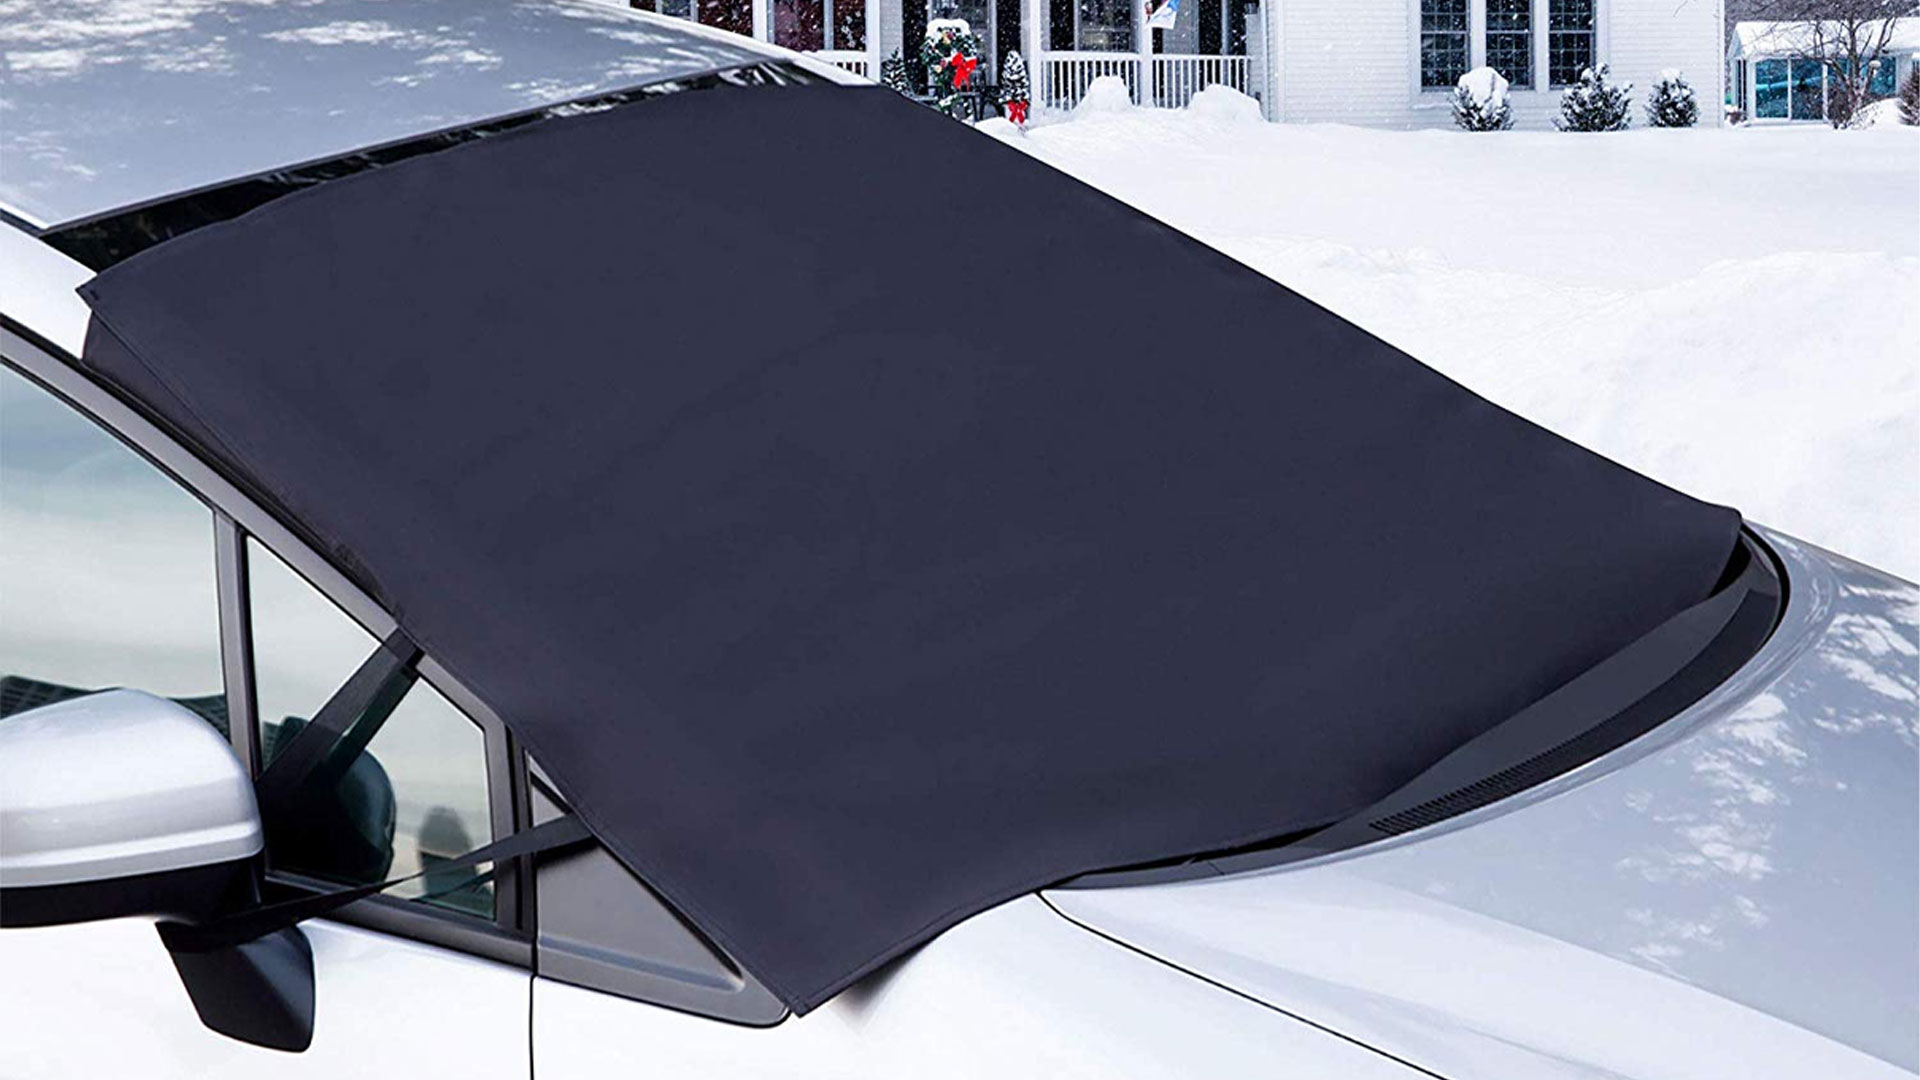 Car Windshield Snow Cover Winter Ice//Frost// Rain Sun Shade Weatherproof Guard Protector Hood with Reflective Warming Straps /& Two Mirror Covers for All Seasons /& Weather